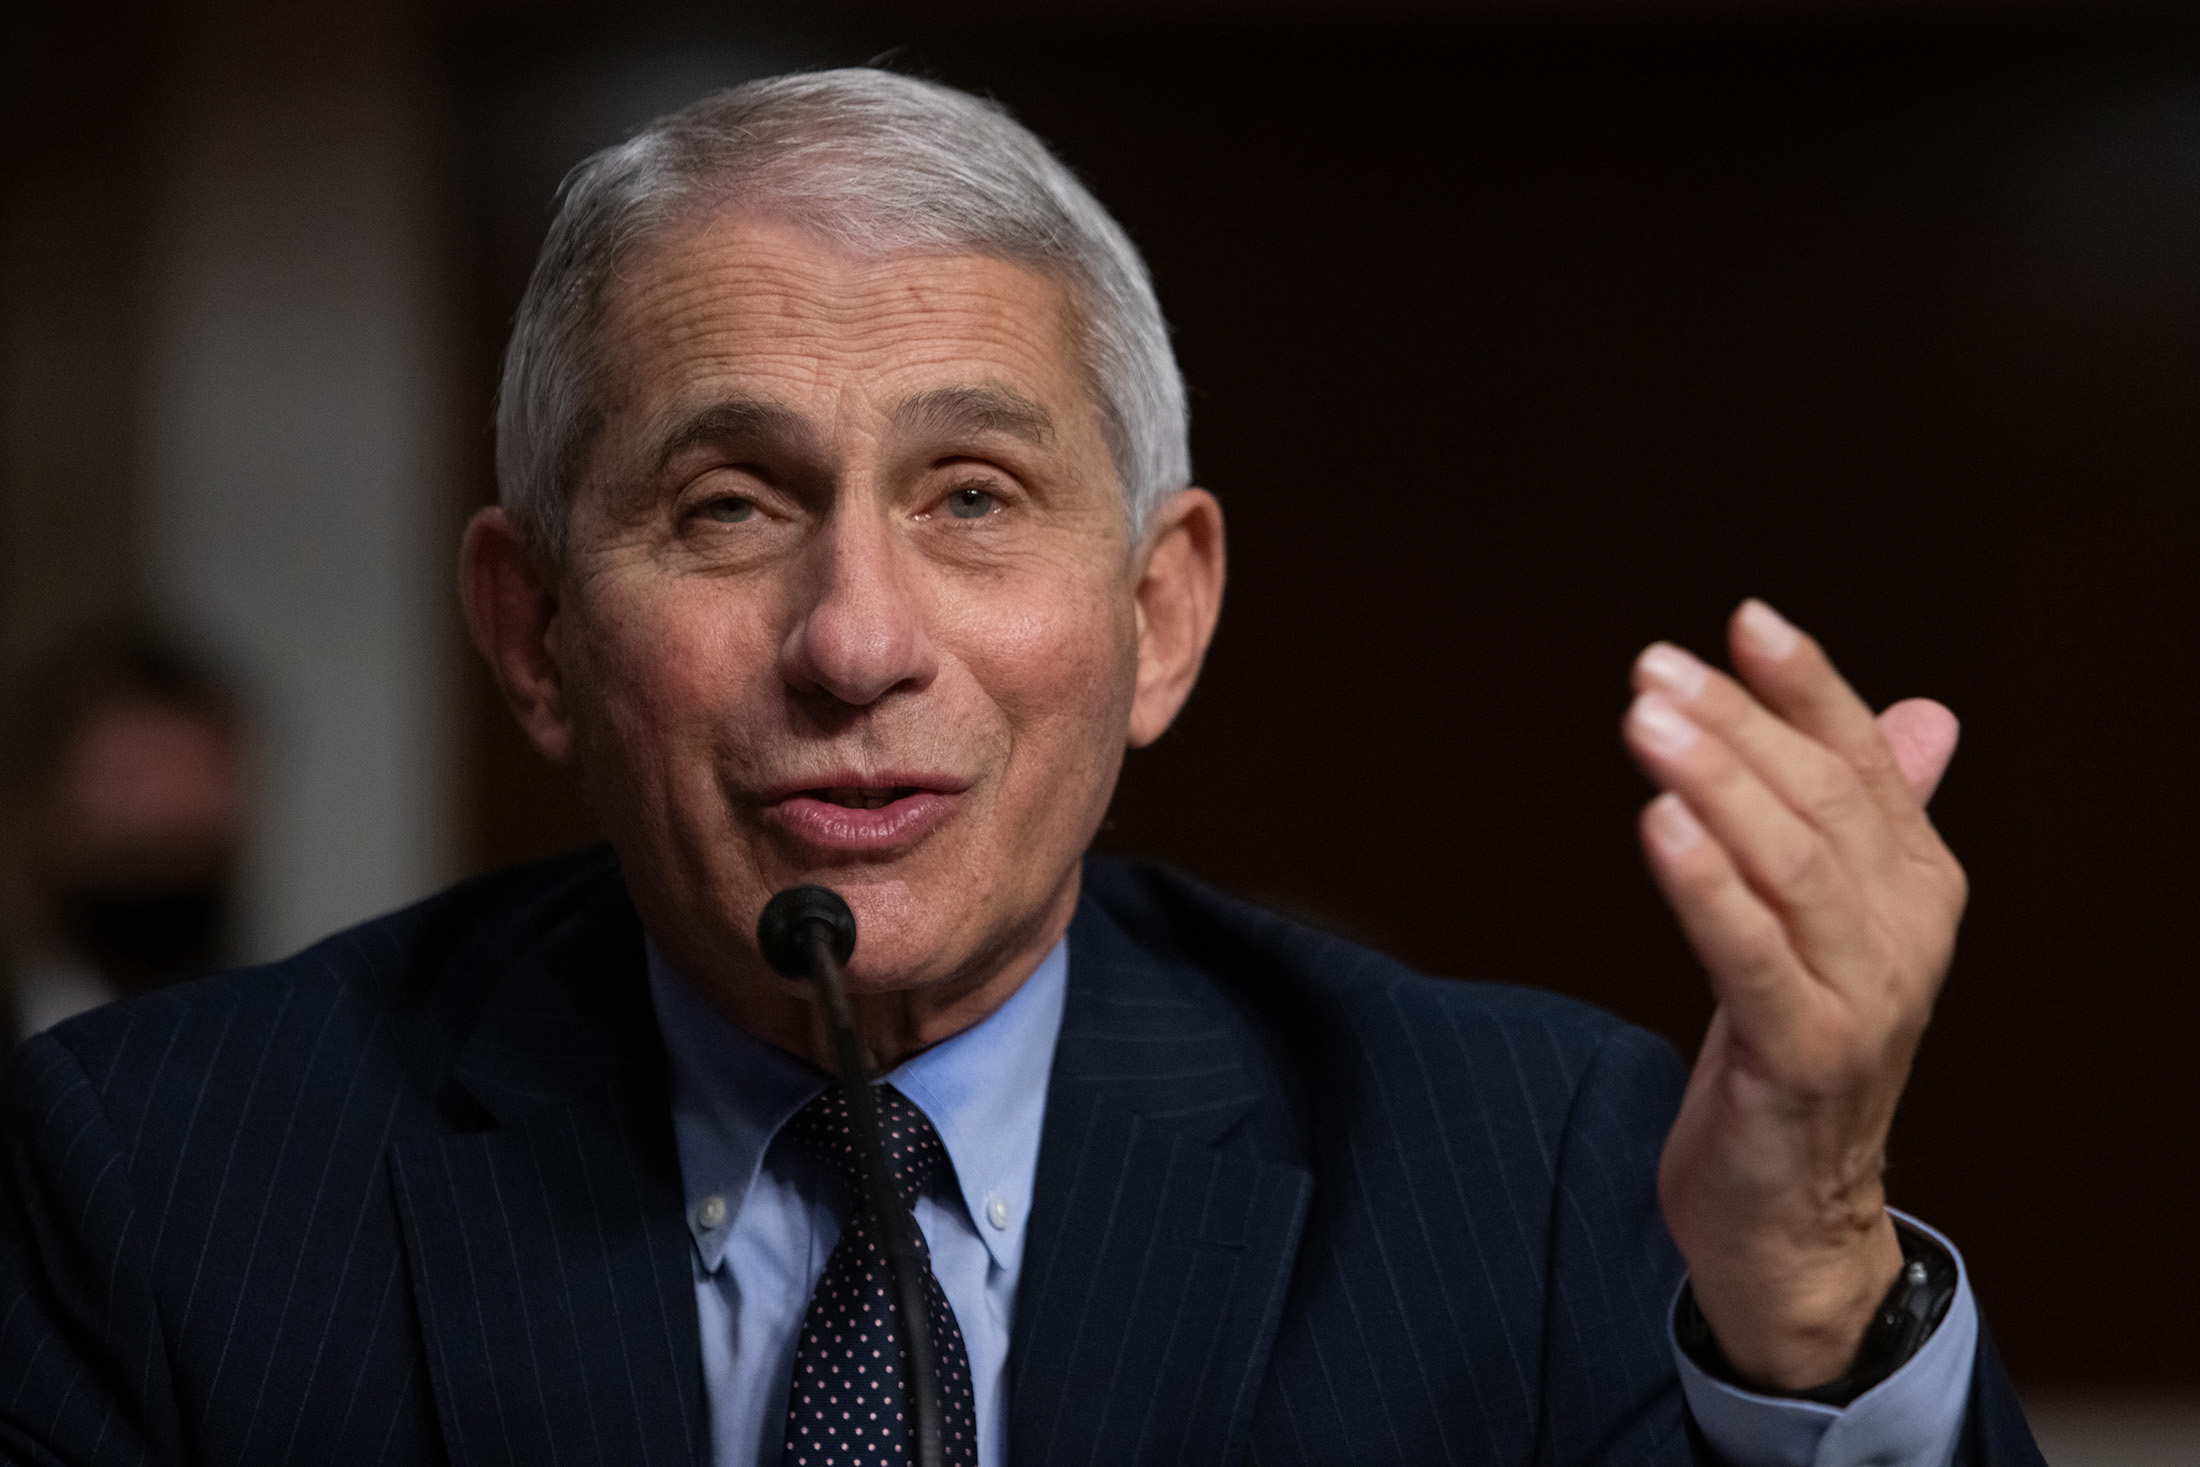 Anthony Fauci, director of the National Institute of Allergy and Infectious Diseases, speaks during a  committee hearing in Washington, D.C, on Wednesday, September 23. 